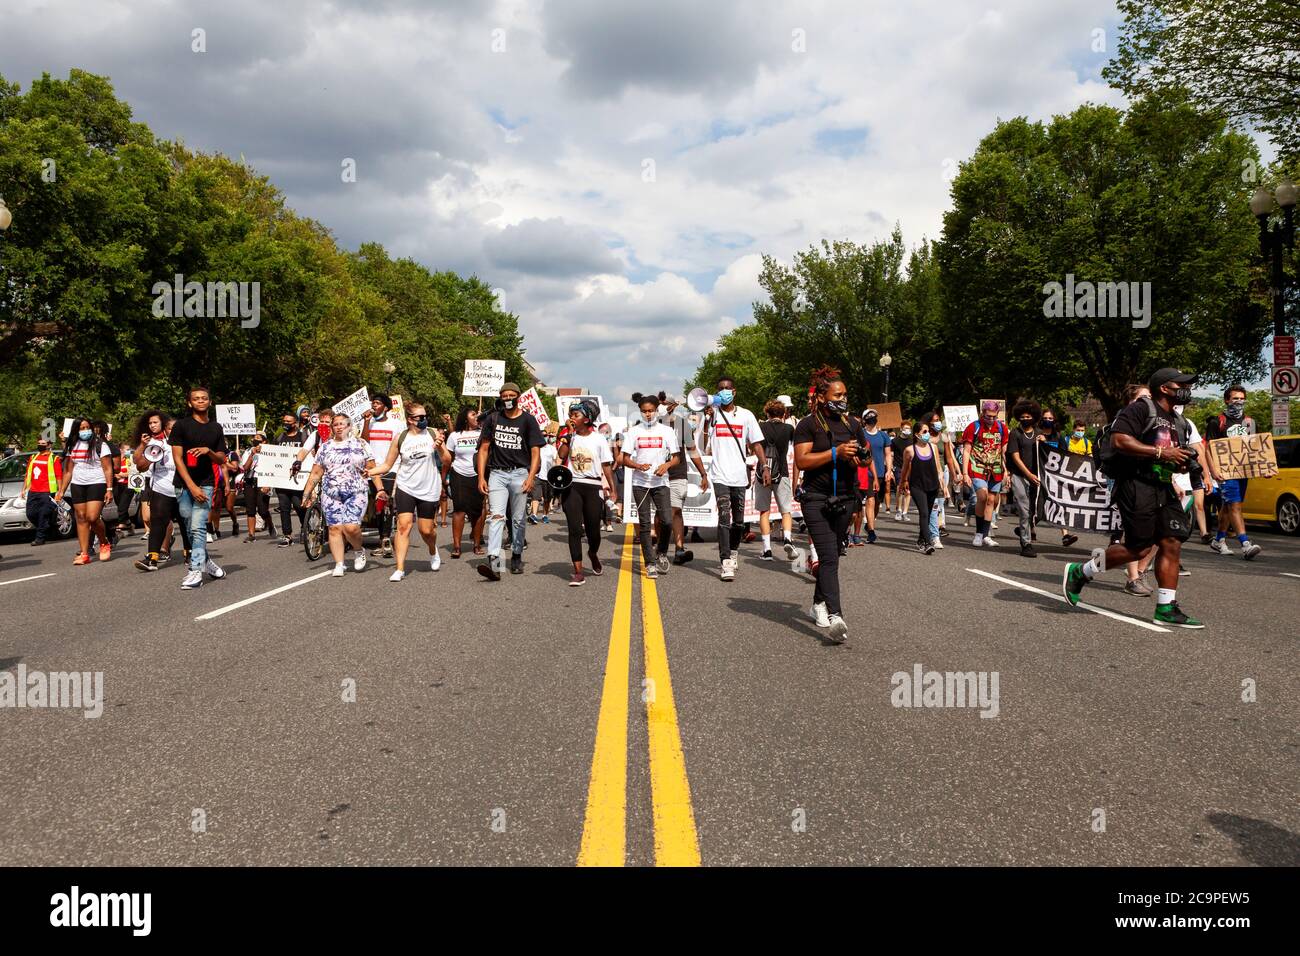 Washington, DC, USA. 1st Aug, 2020. Pictured: Demand DC protesters walk down Constitution Avenue during a march hosted by The Palm Collective. Protesters are demanding four changes from city government: police-free schools, an end to qualified immunity for police officers, a new public safety department, and designation of election day as a holiday. Credit: Allison C Bailey/Alamy Credit: Allison Bailey/Alamy Live News Stock Photo